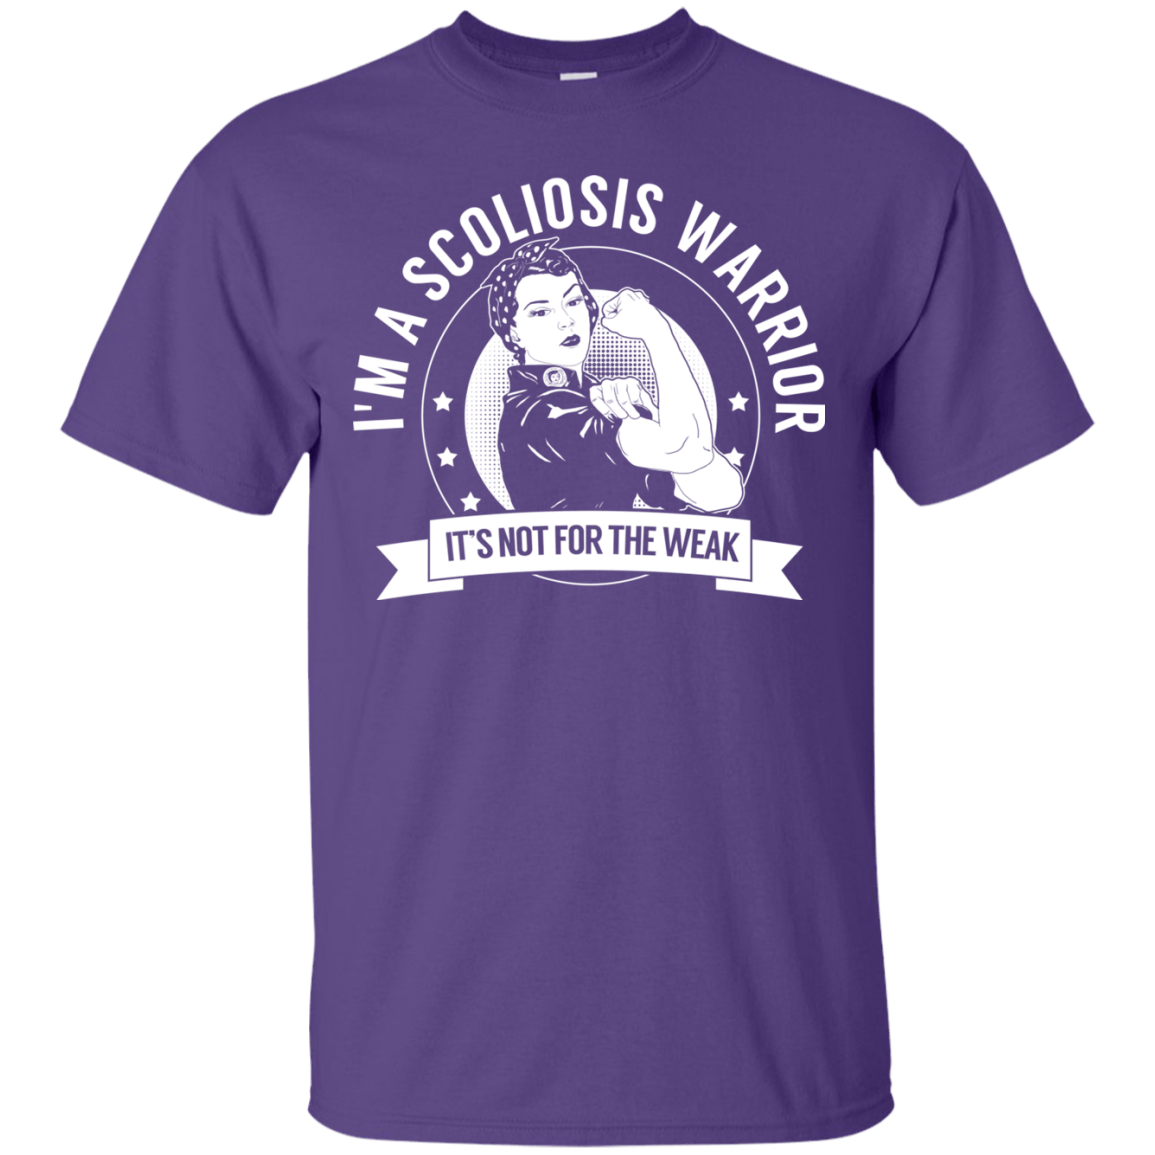 Scoliosis Warrior Not For The Weak Unisex Shirt - The Unchargeables